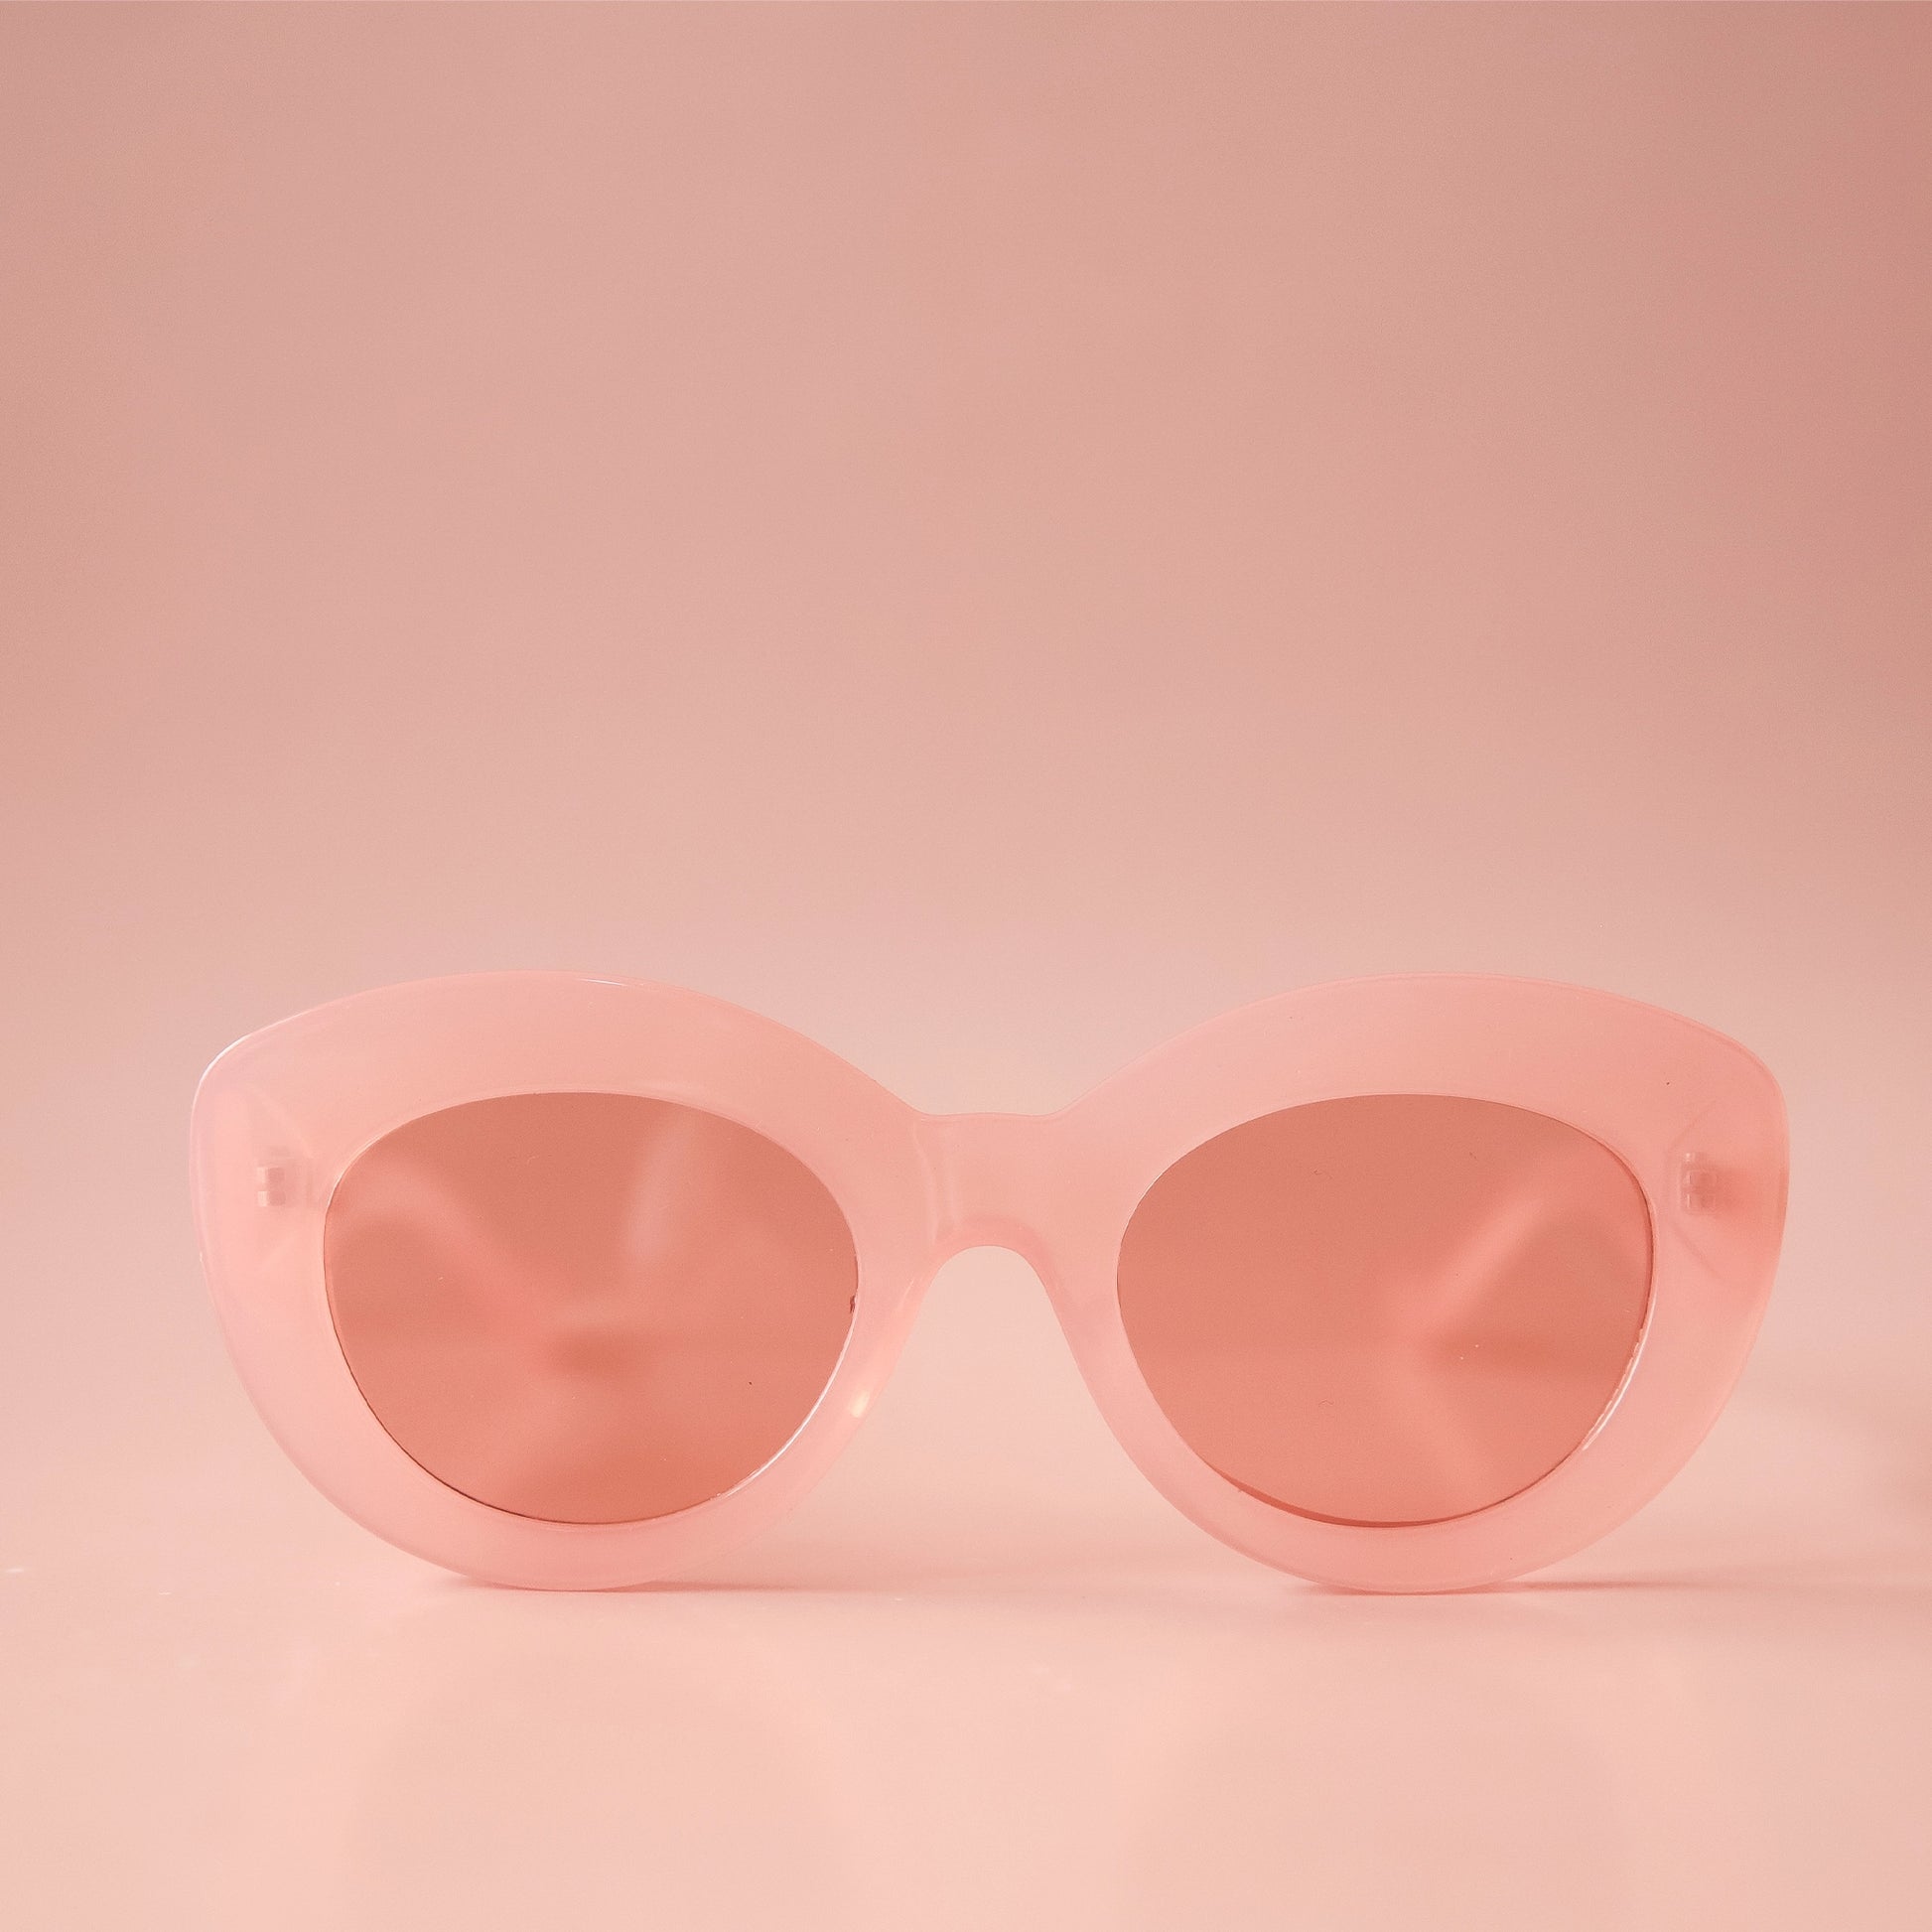 On a light peachy background is a pink pair of sunglasses with a rounded shape and a slight cateye at the corner along with a peachy lens.